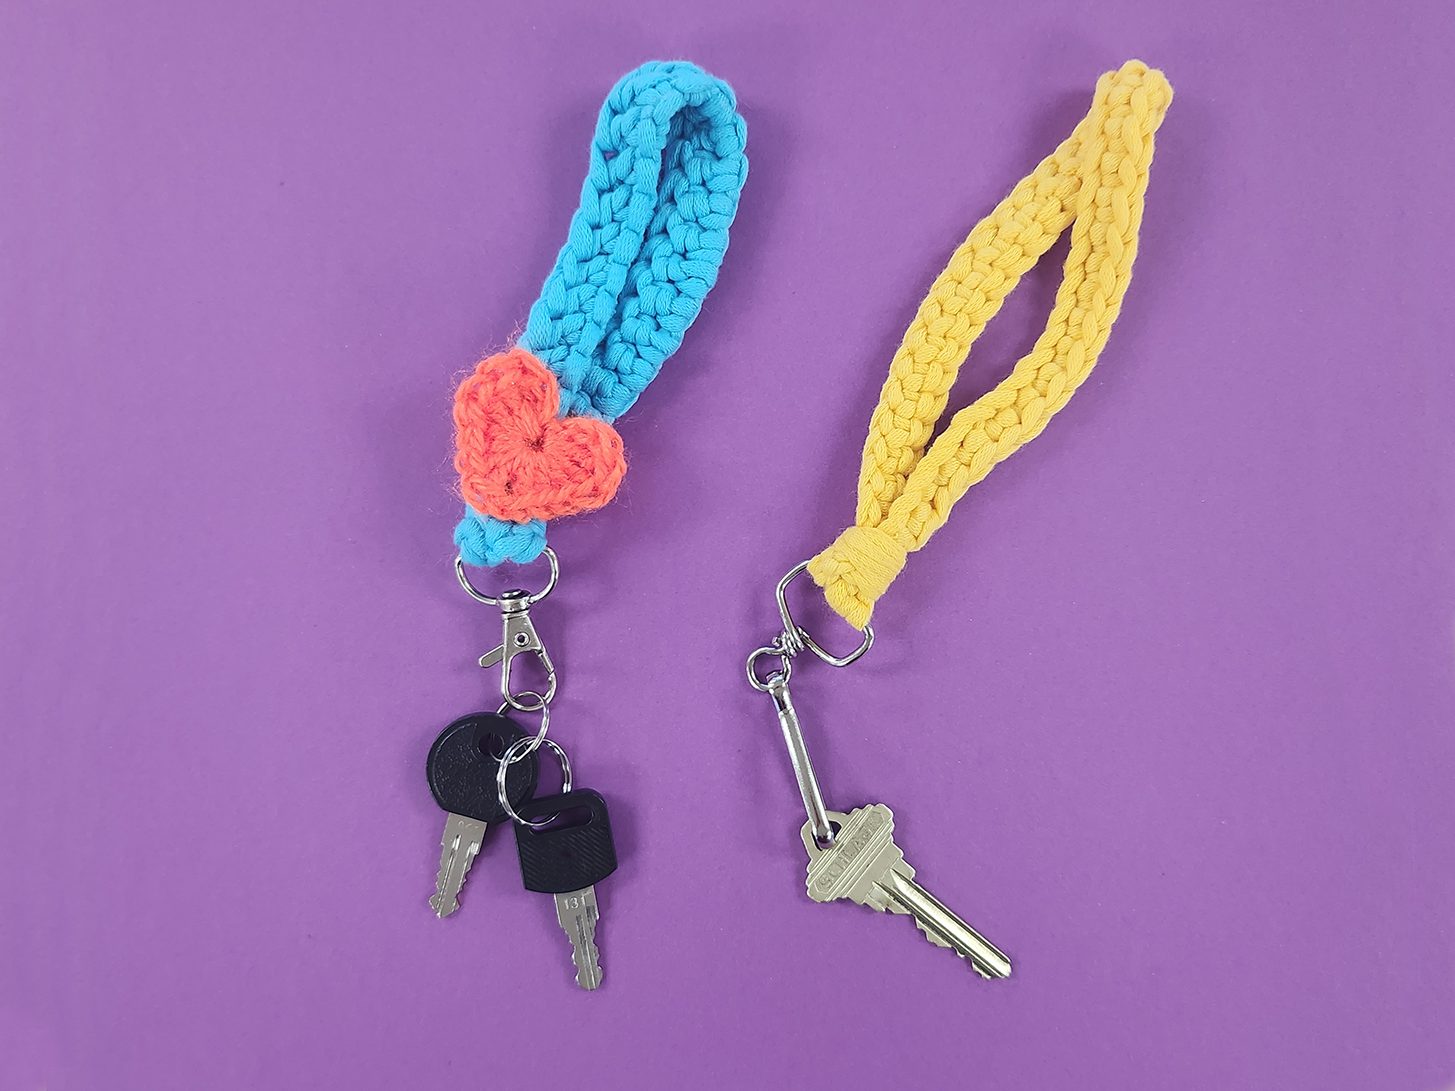 Crochet keychain lanyards with keys on a purple background. Left is blue yarn with an orange heart detail and right is a bright yellow lanyard.